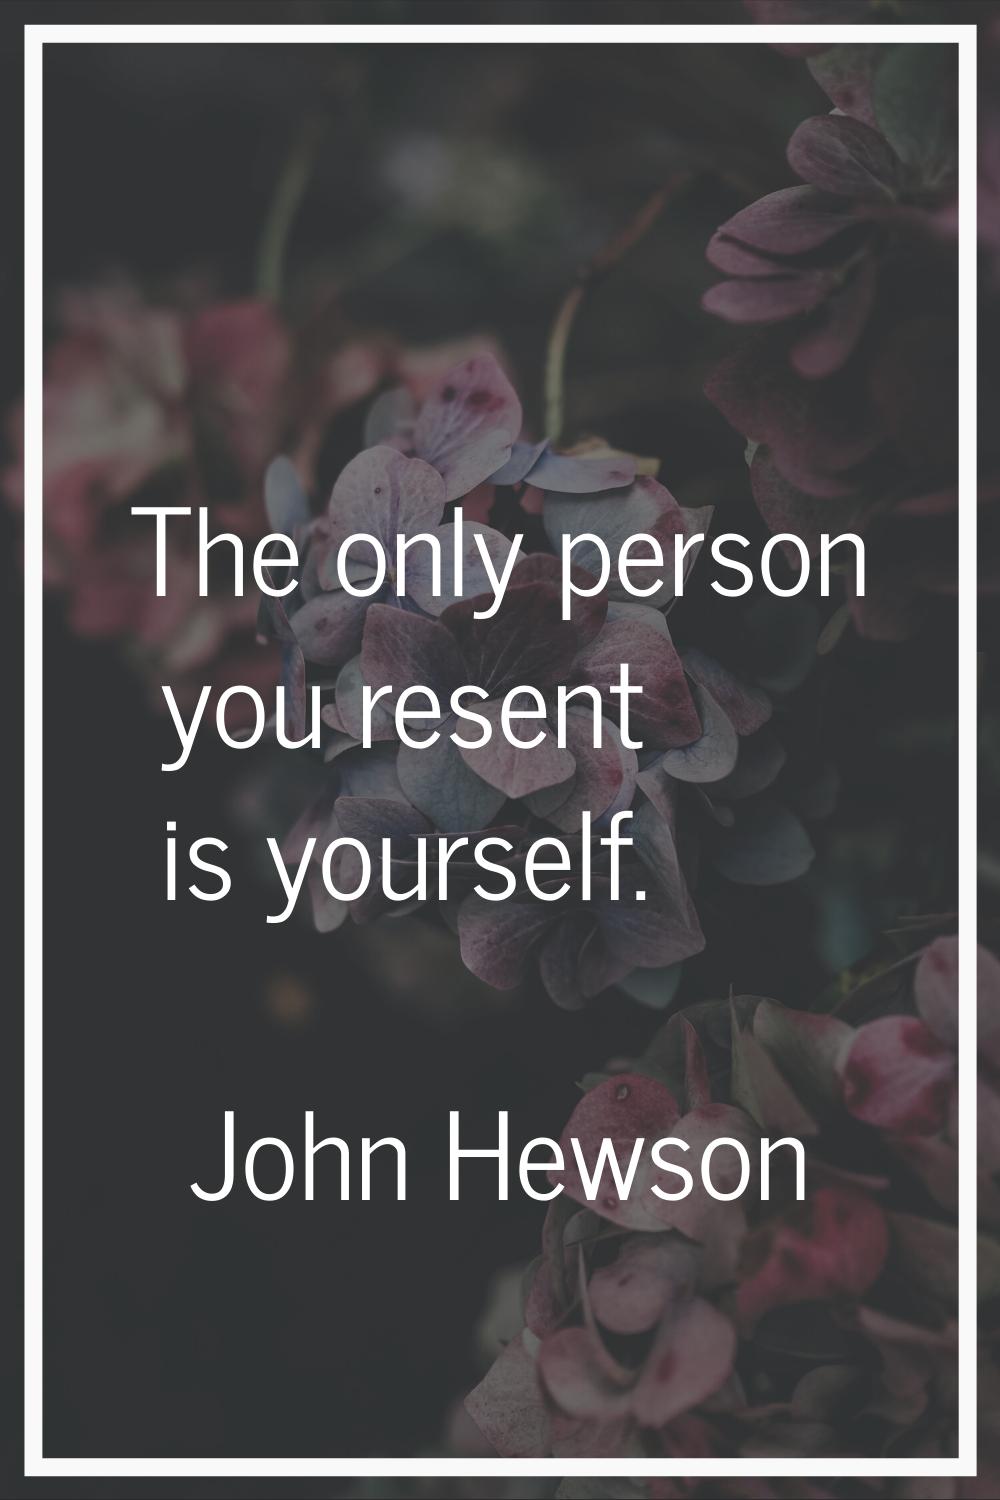 The only person you resent is yourself.